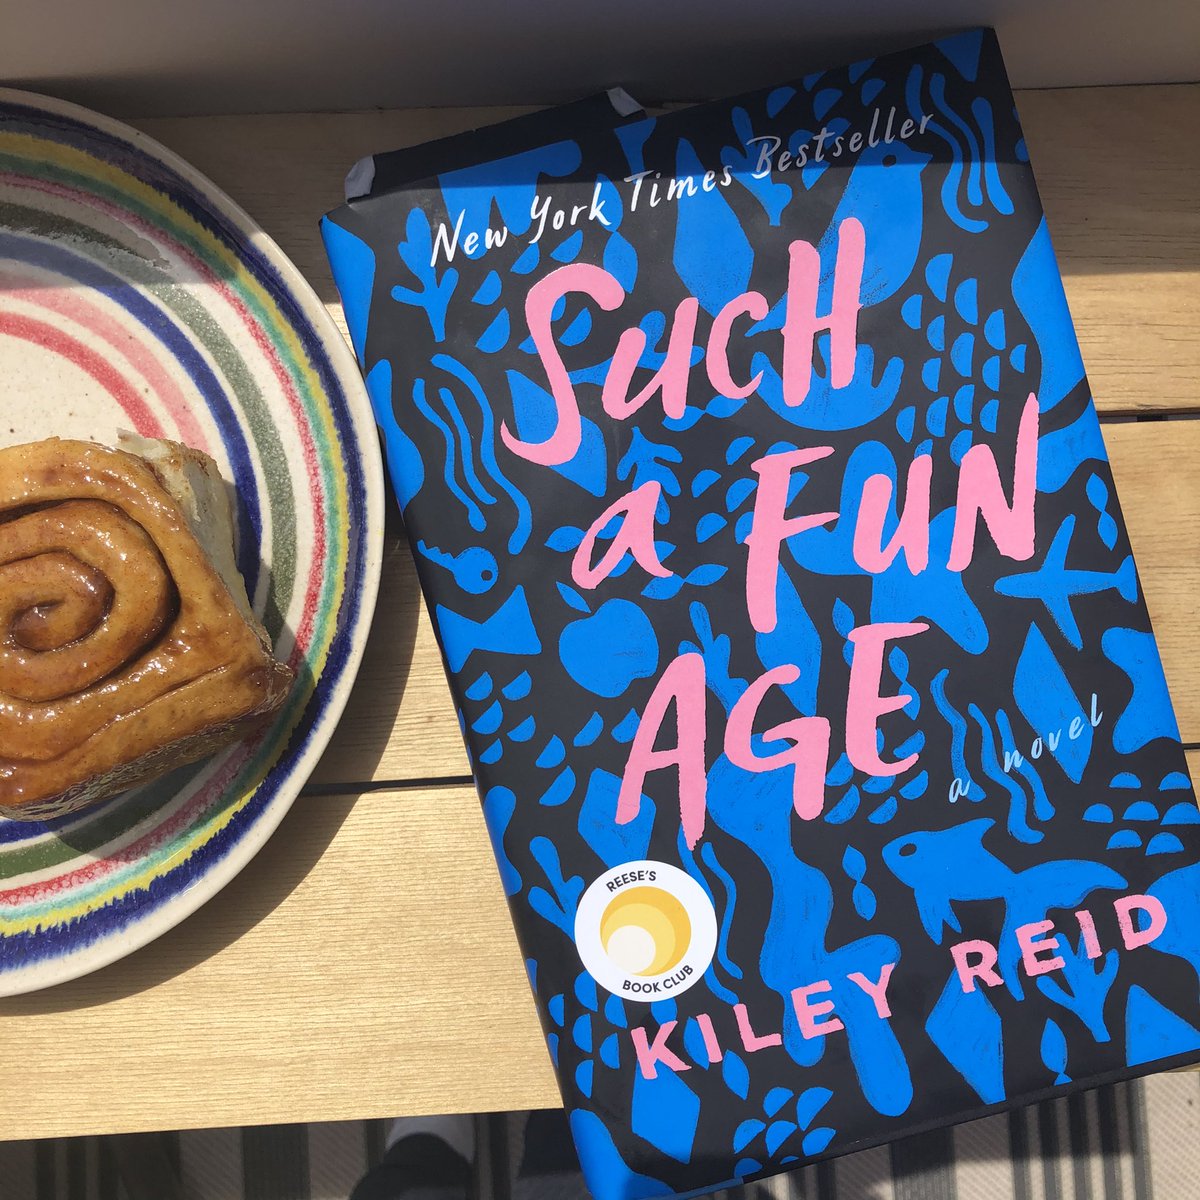 46/52Such a Fun Age by Kiley Reid. This books opens with a quote from Rachel Sherman’s book Uneasy Street: The Anxieties of Affluence, which I highly recommend  #52booksin52weeks  #2020books  #booksof2020  #pandemicreading